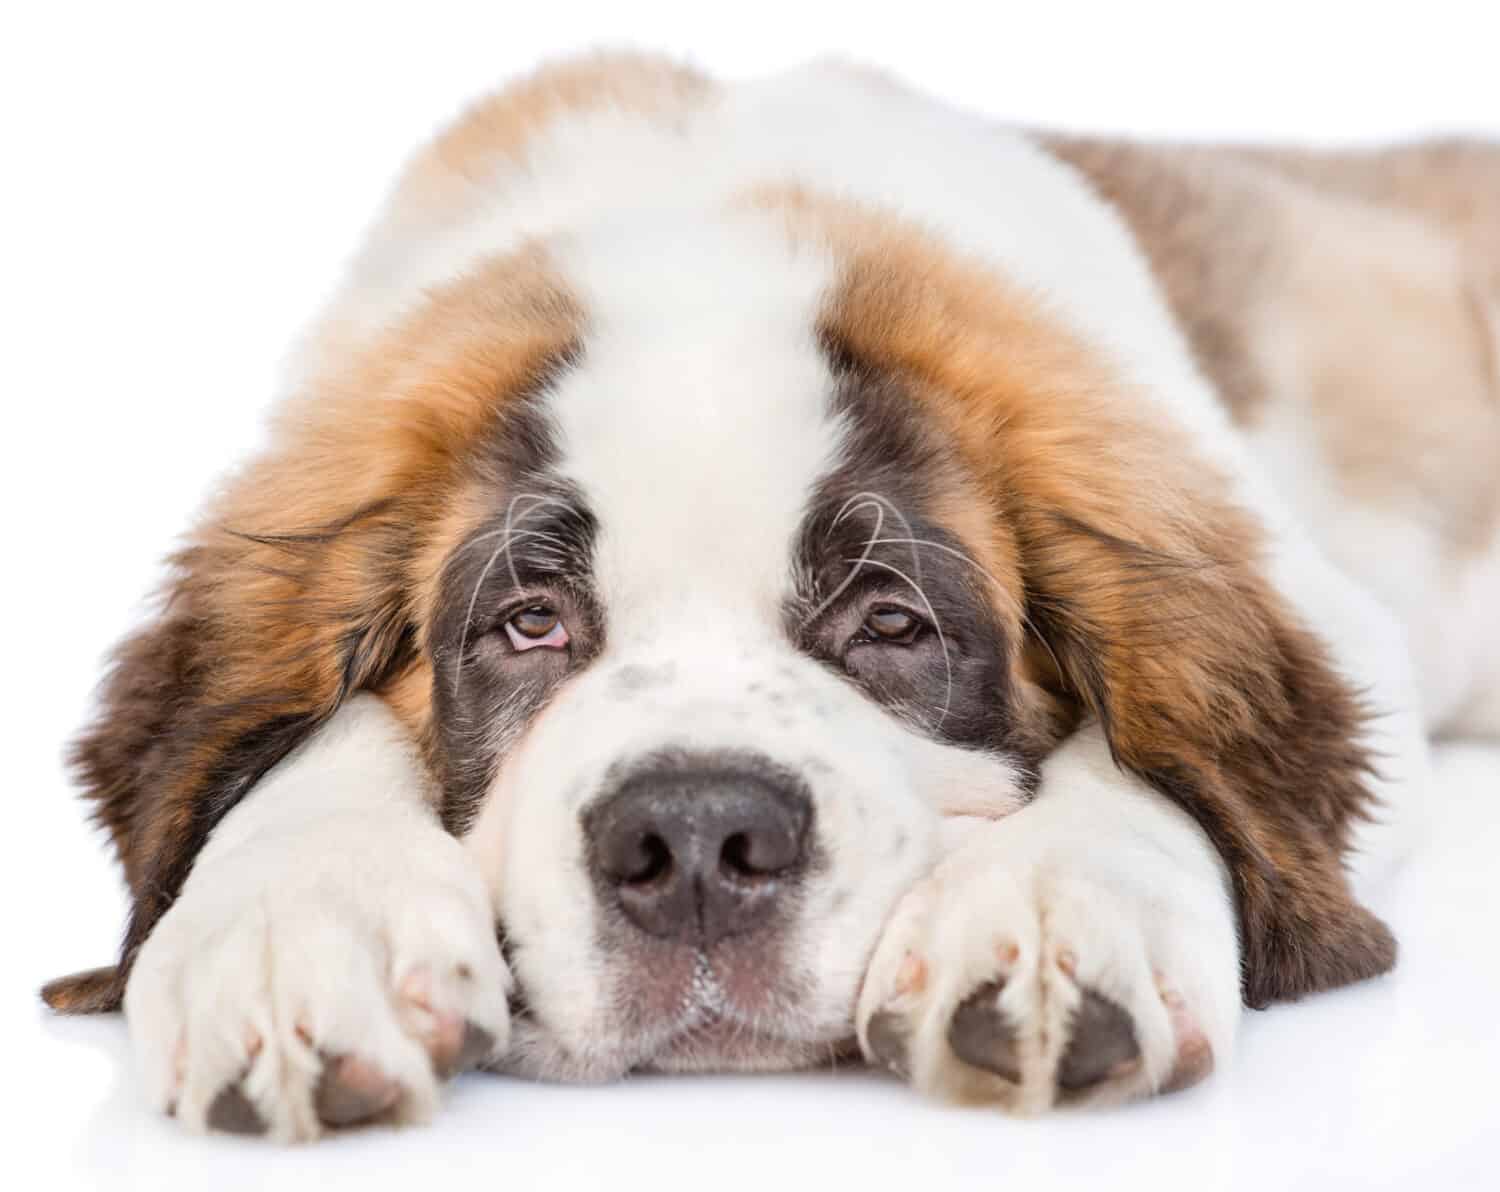 Sad St. Bernard puppy looking at camera. isolated on white background